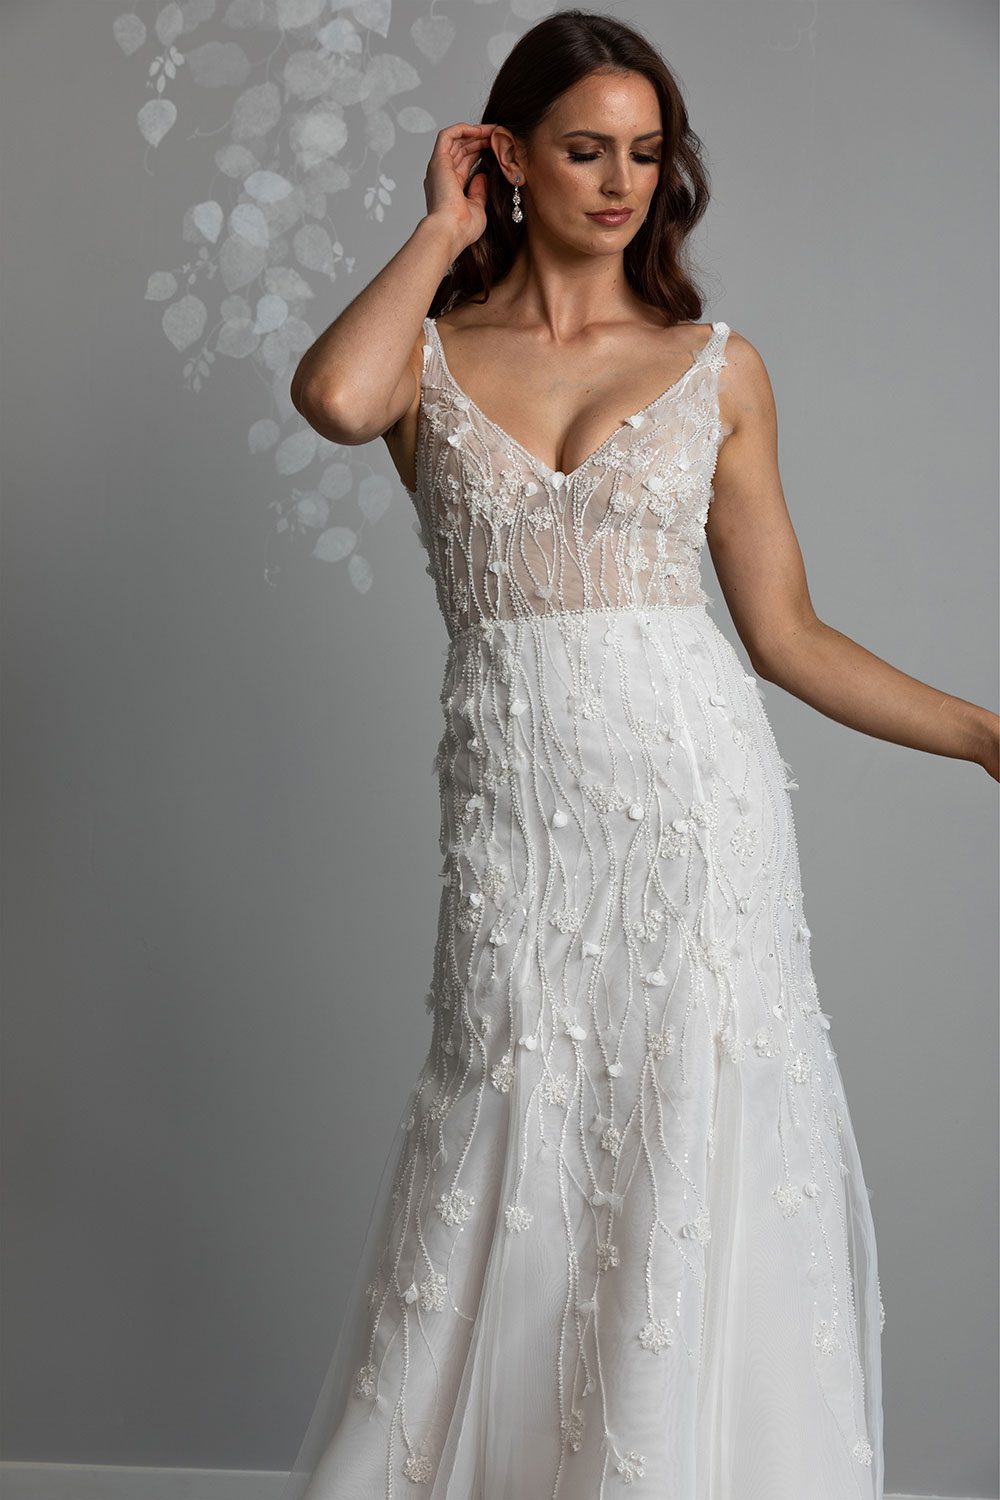 Bronte Wedding Dress by Vinka Design - Featuring a form sculpting mermaid silhouette that embraces the wearer's curves, and intricately embroidered, beaded, botanical lace that trails seamlessly from the bodice into the skirt. Crafted on a semi-sheer base, the bodice boasts a V-neckline and beautiful low V-back. Artfully constructed with layers of dreamy, yet dramatic silk organza and soft tulle, added flare and fullness is achieved through the skirt which fans into a sweeping opulent train. Full length view of model with hand to hair wearing V-neckline bodice with beaded botanical lace with a dreamy silk organza and soft tulle skirt